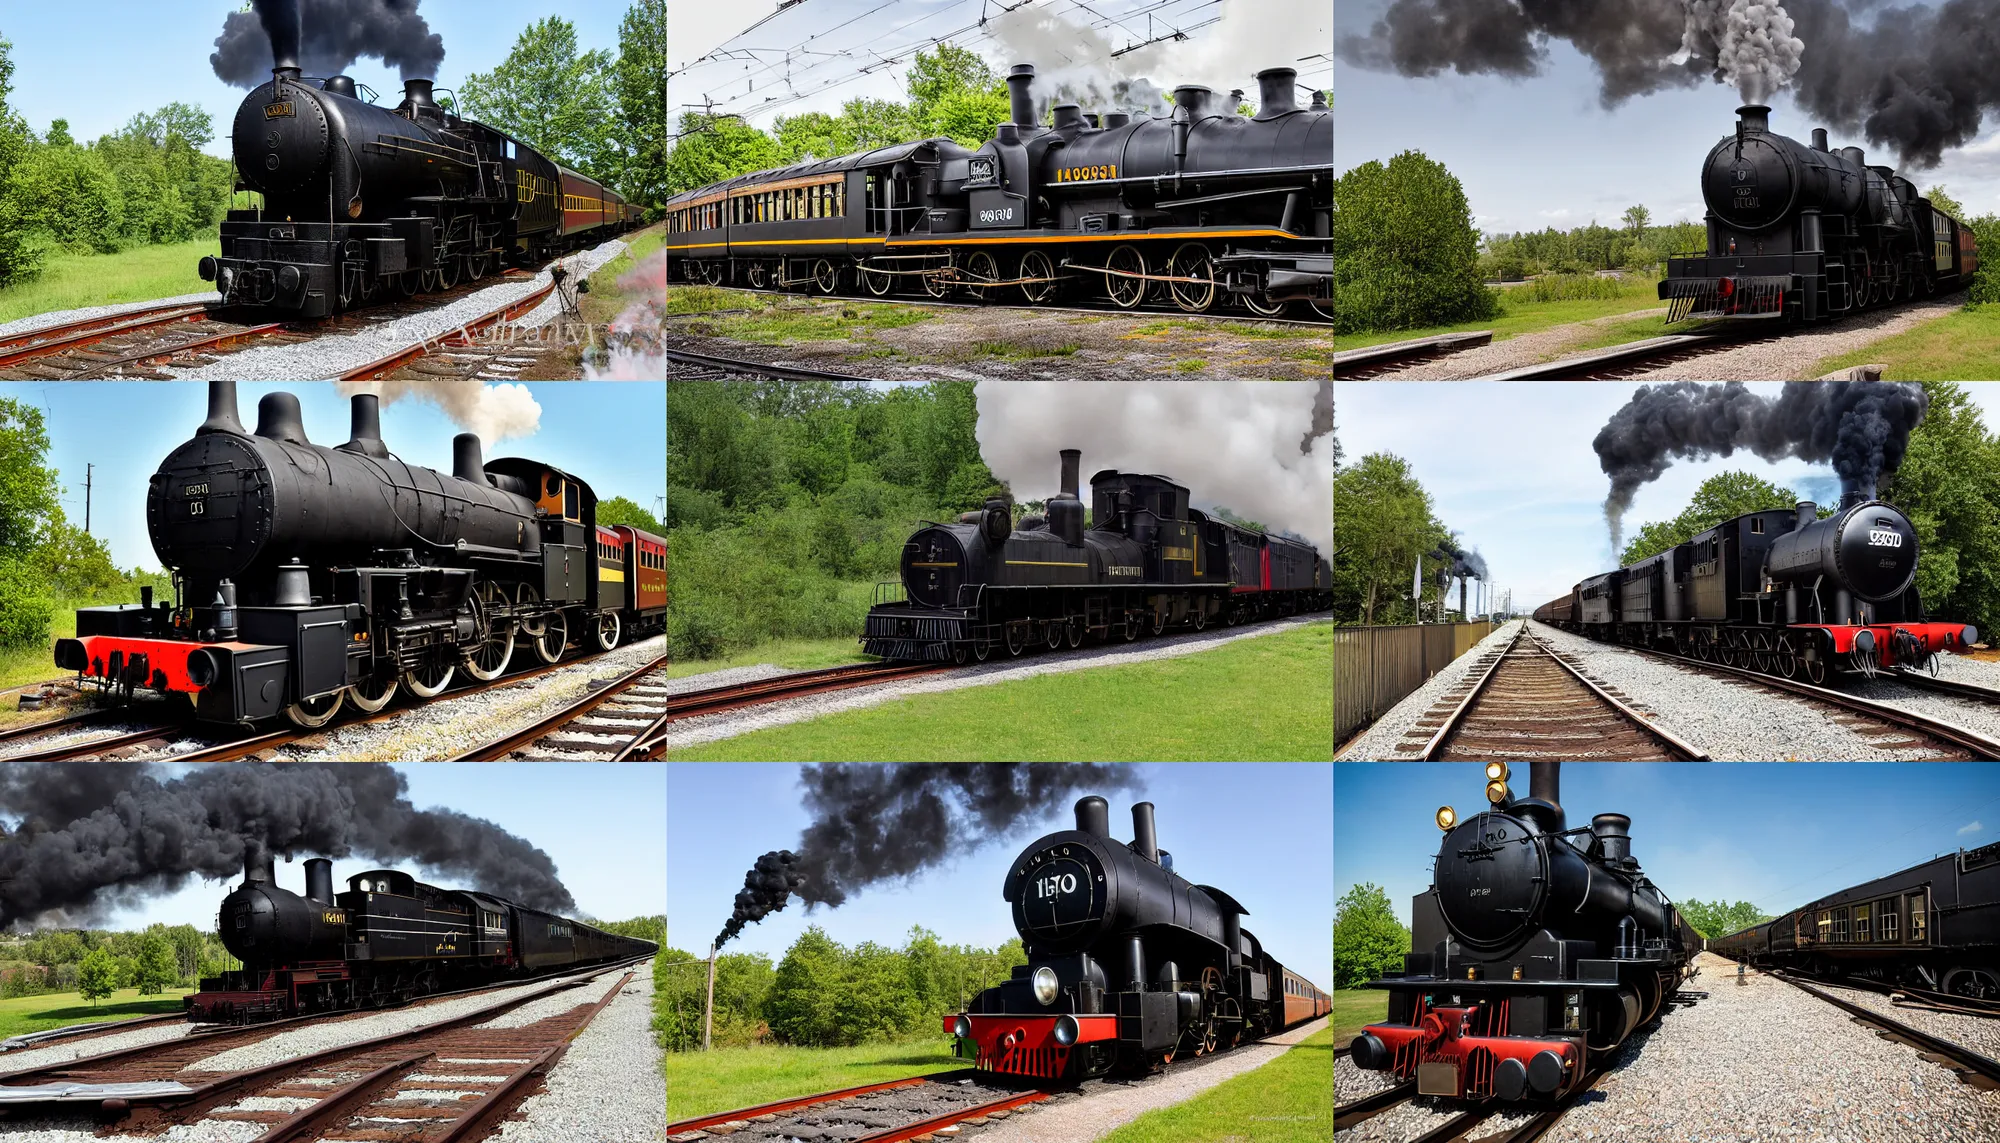 Prompt: restored black steam locomotive travelling on train tracks from left to right, photograph